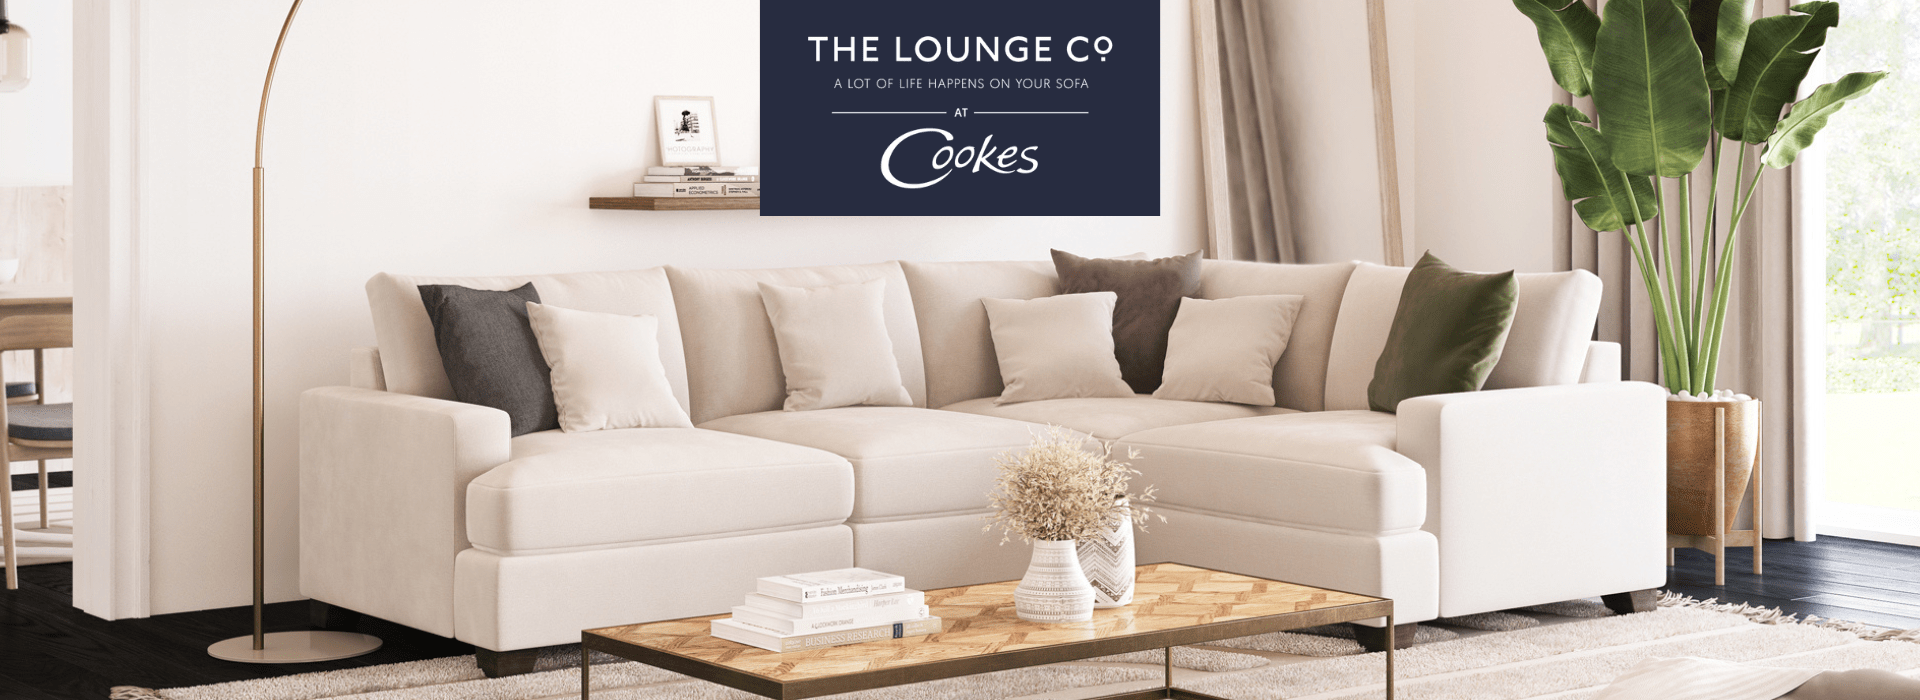 The Lounge Co Lola Landing Page Banner 